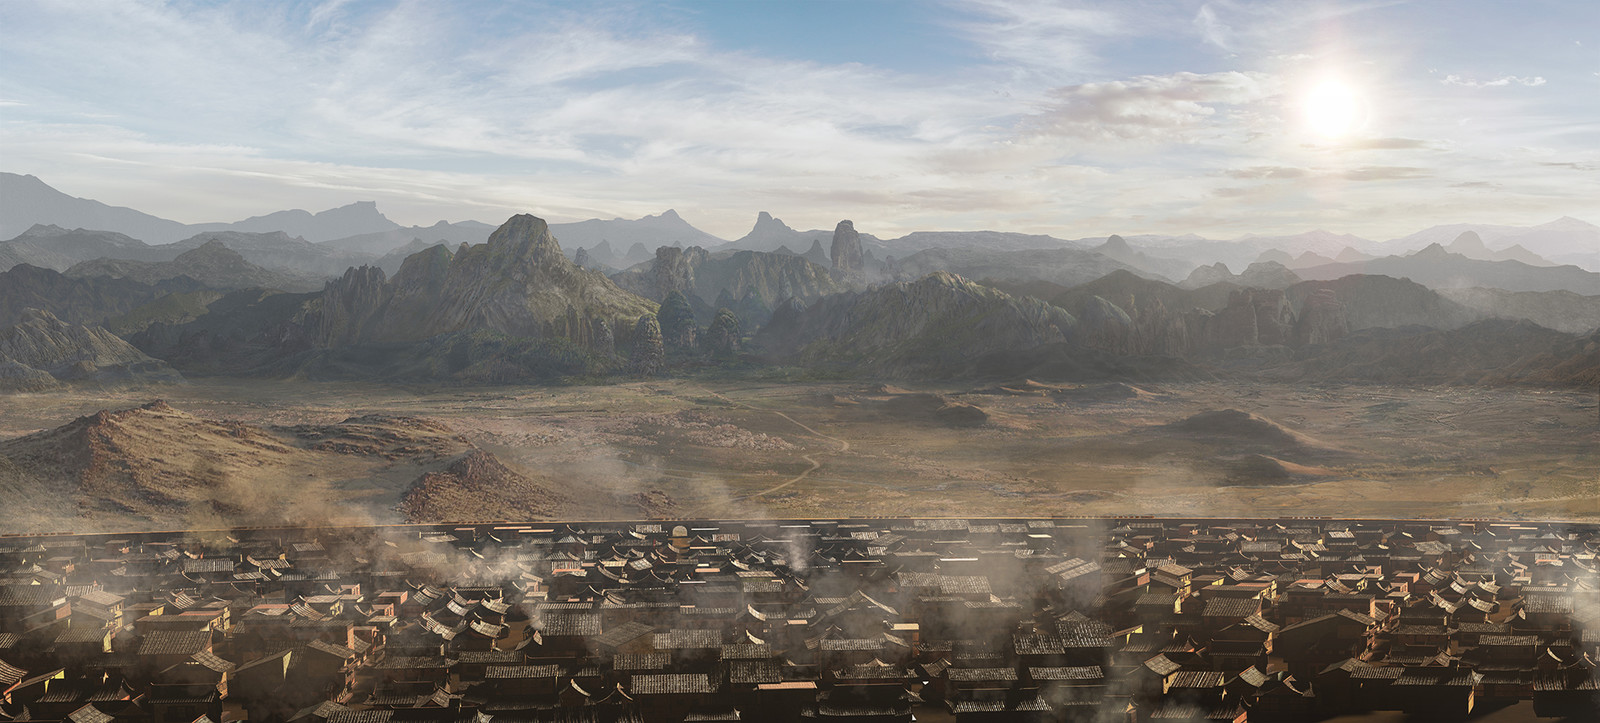 Concept &amp; Matte painting background